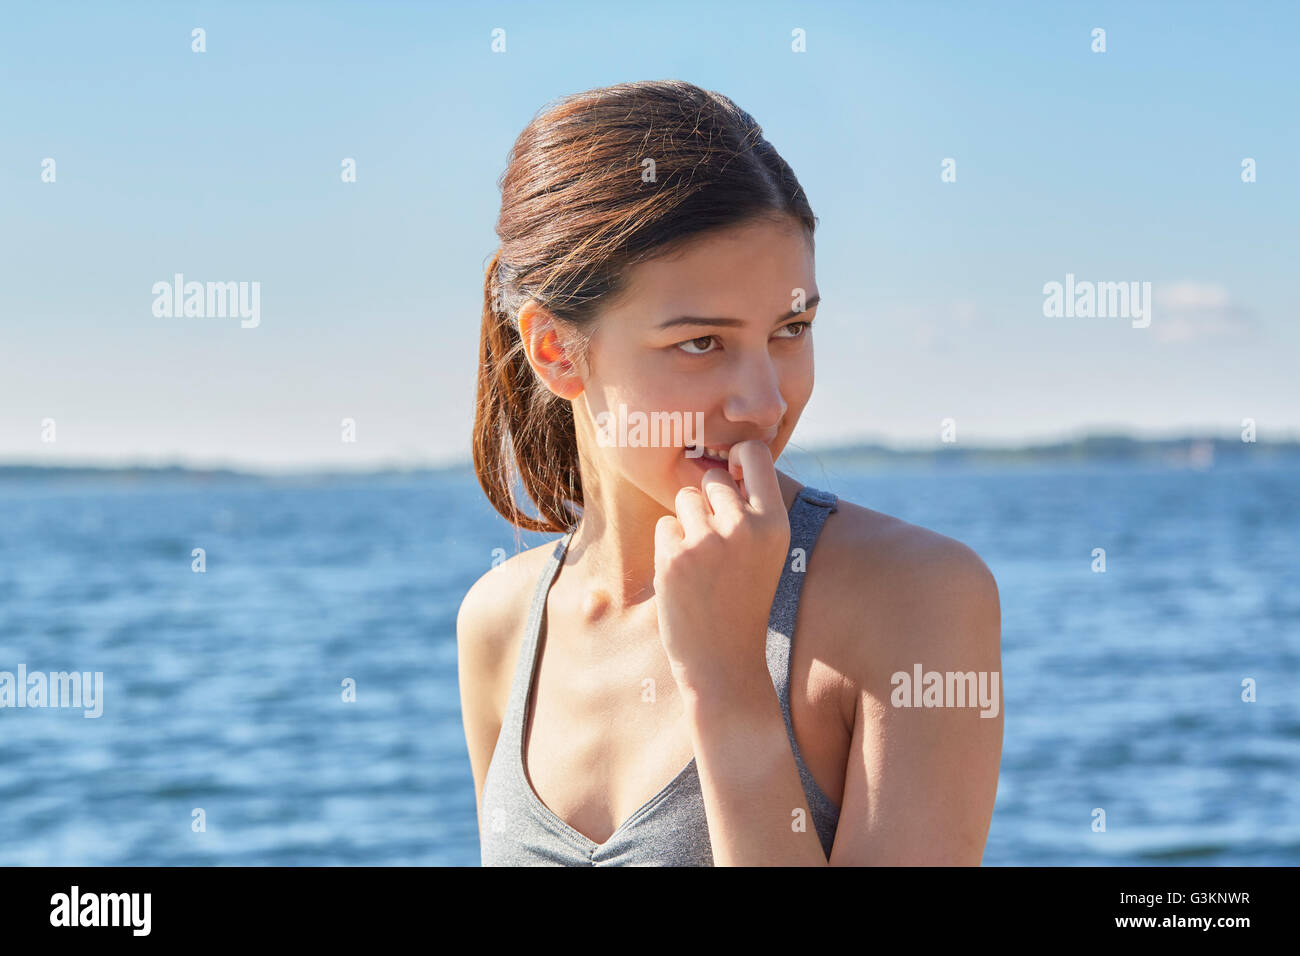 Women in front of ocean with finger in mouth looking away Stock Photo